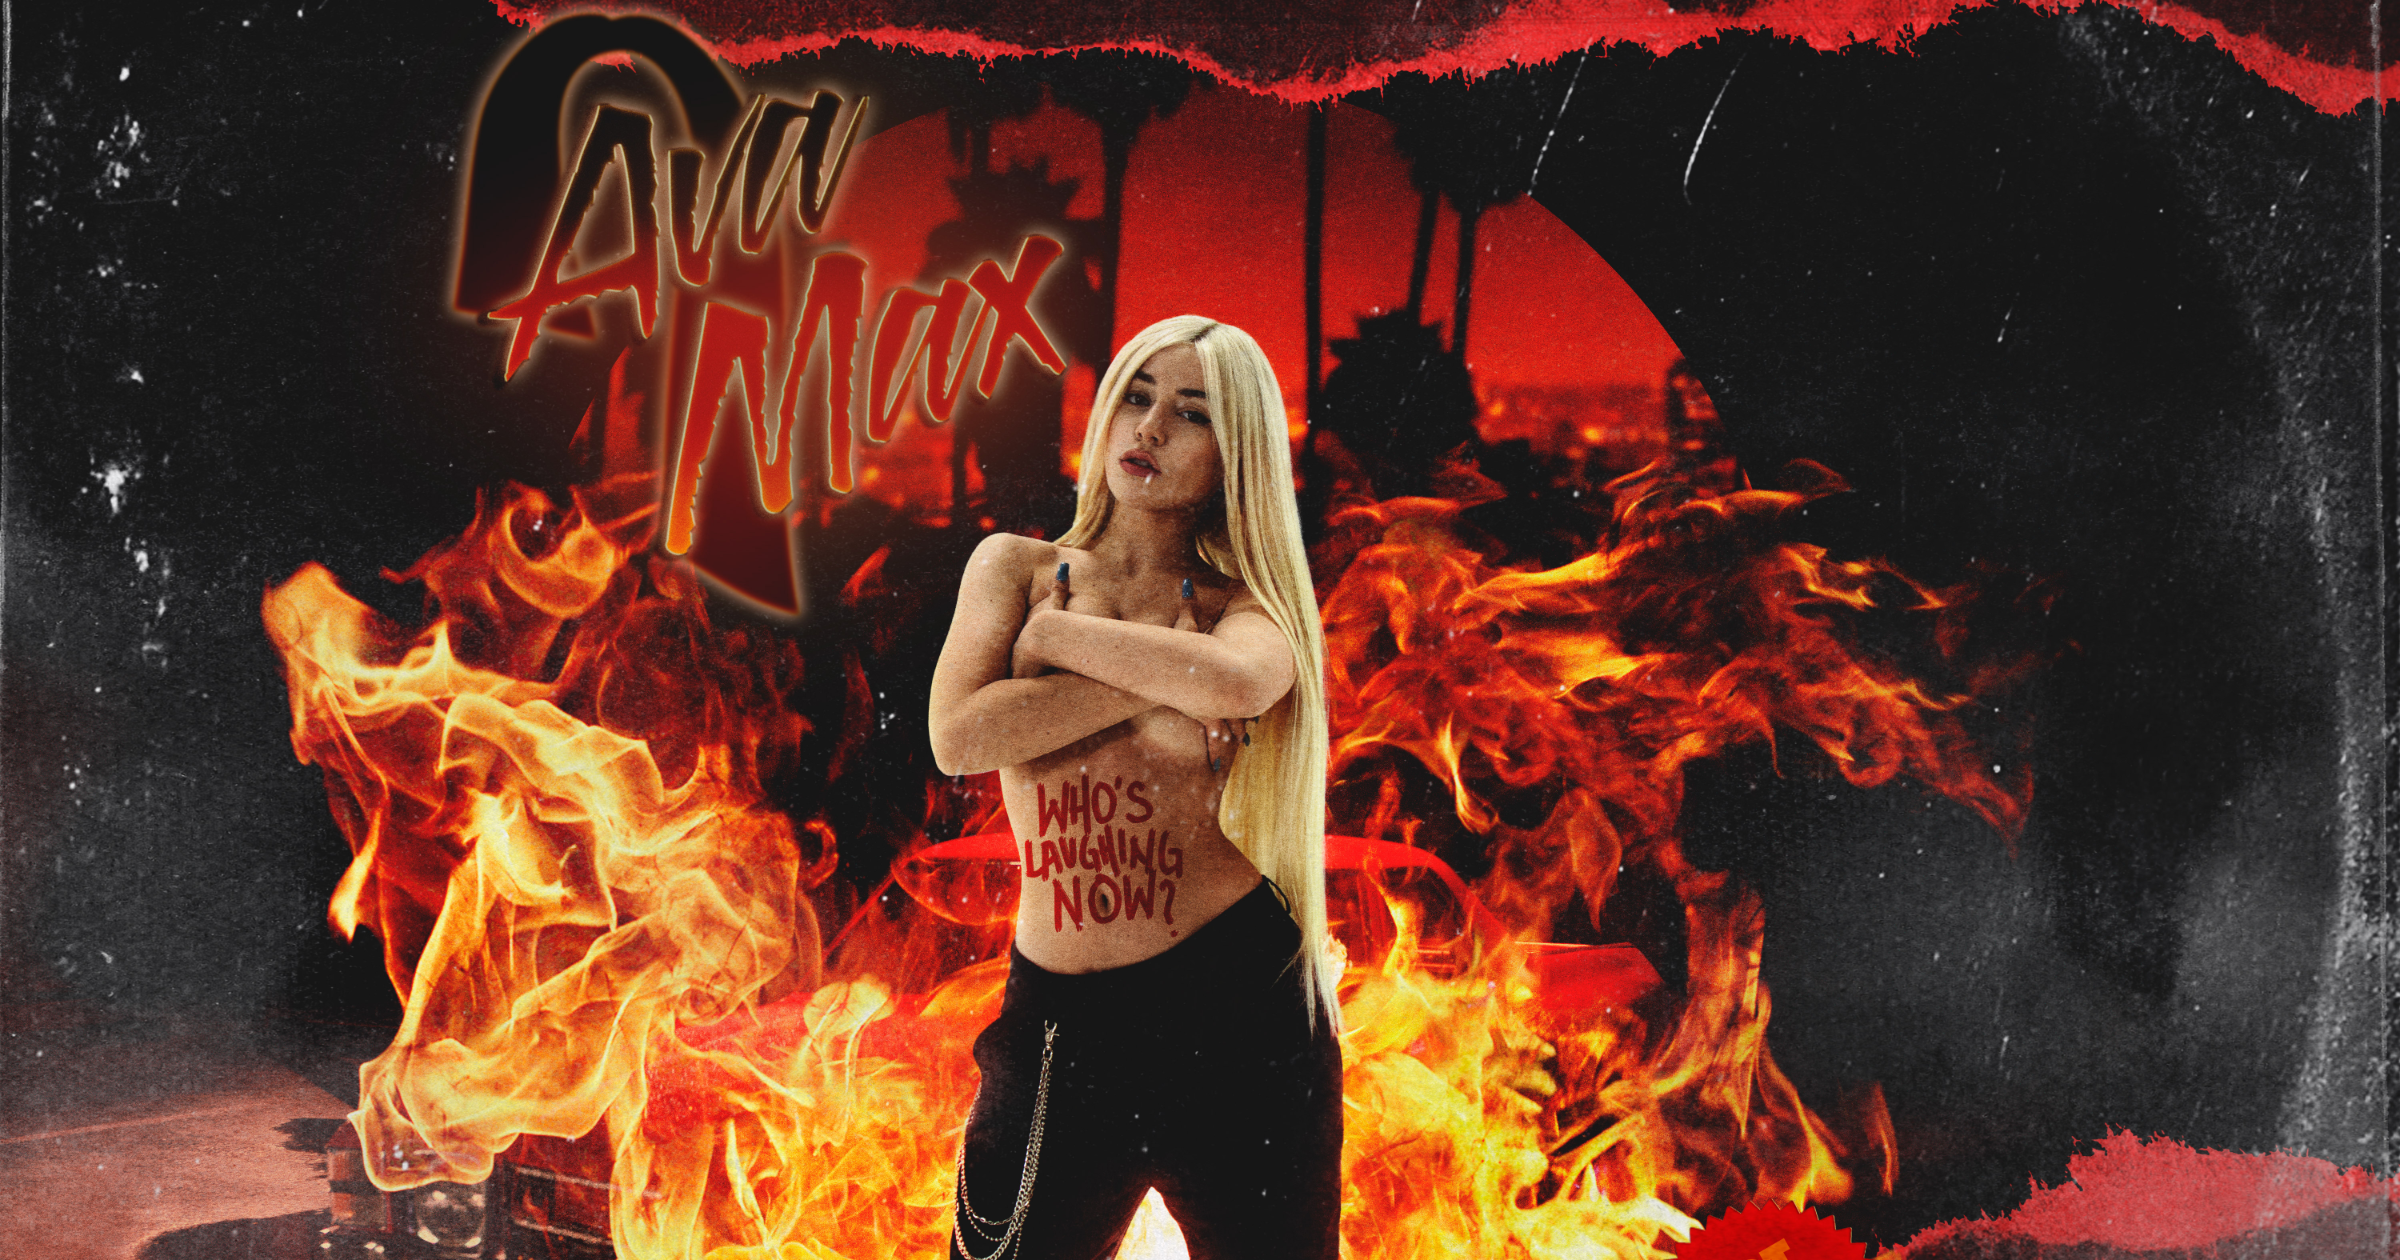 Who’s laughing Now Эйва Макс. Эйва Макс Heaven Hell. Ava Max "Heaven & Hell". Ава Макс who's laughing. Ava hell